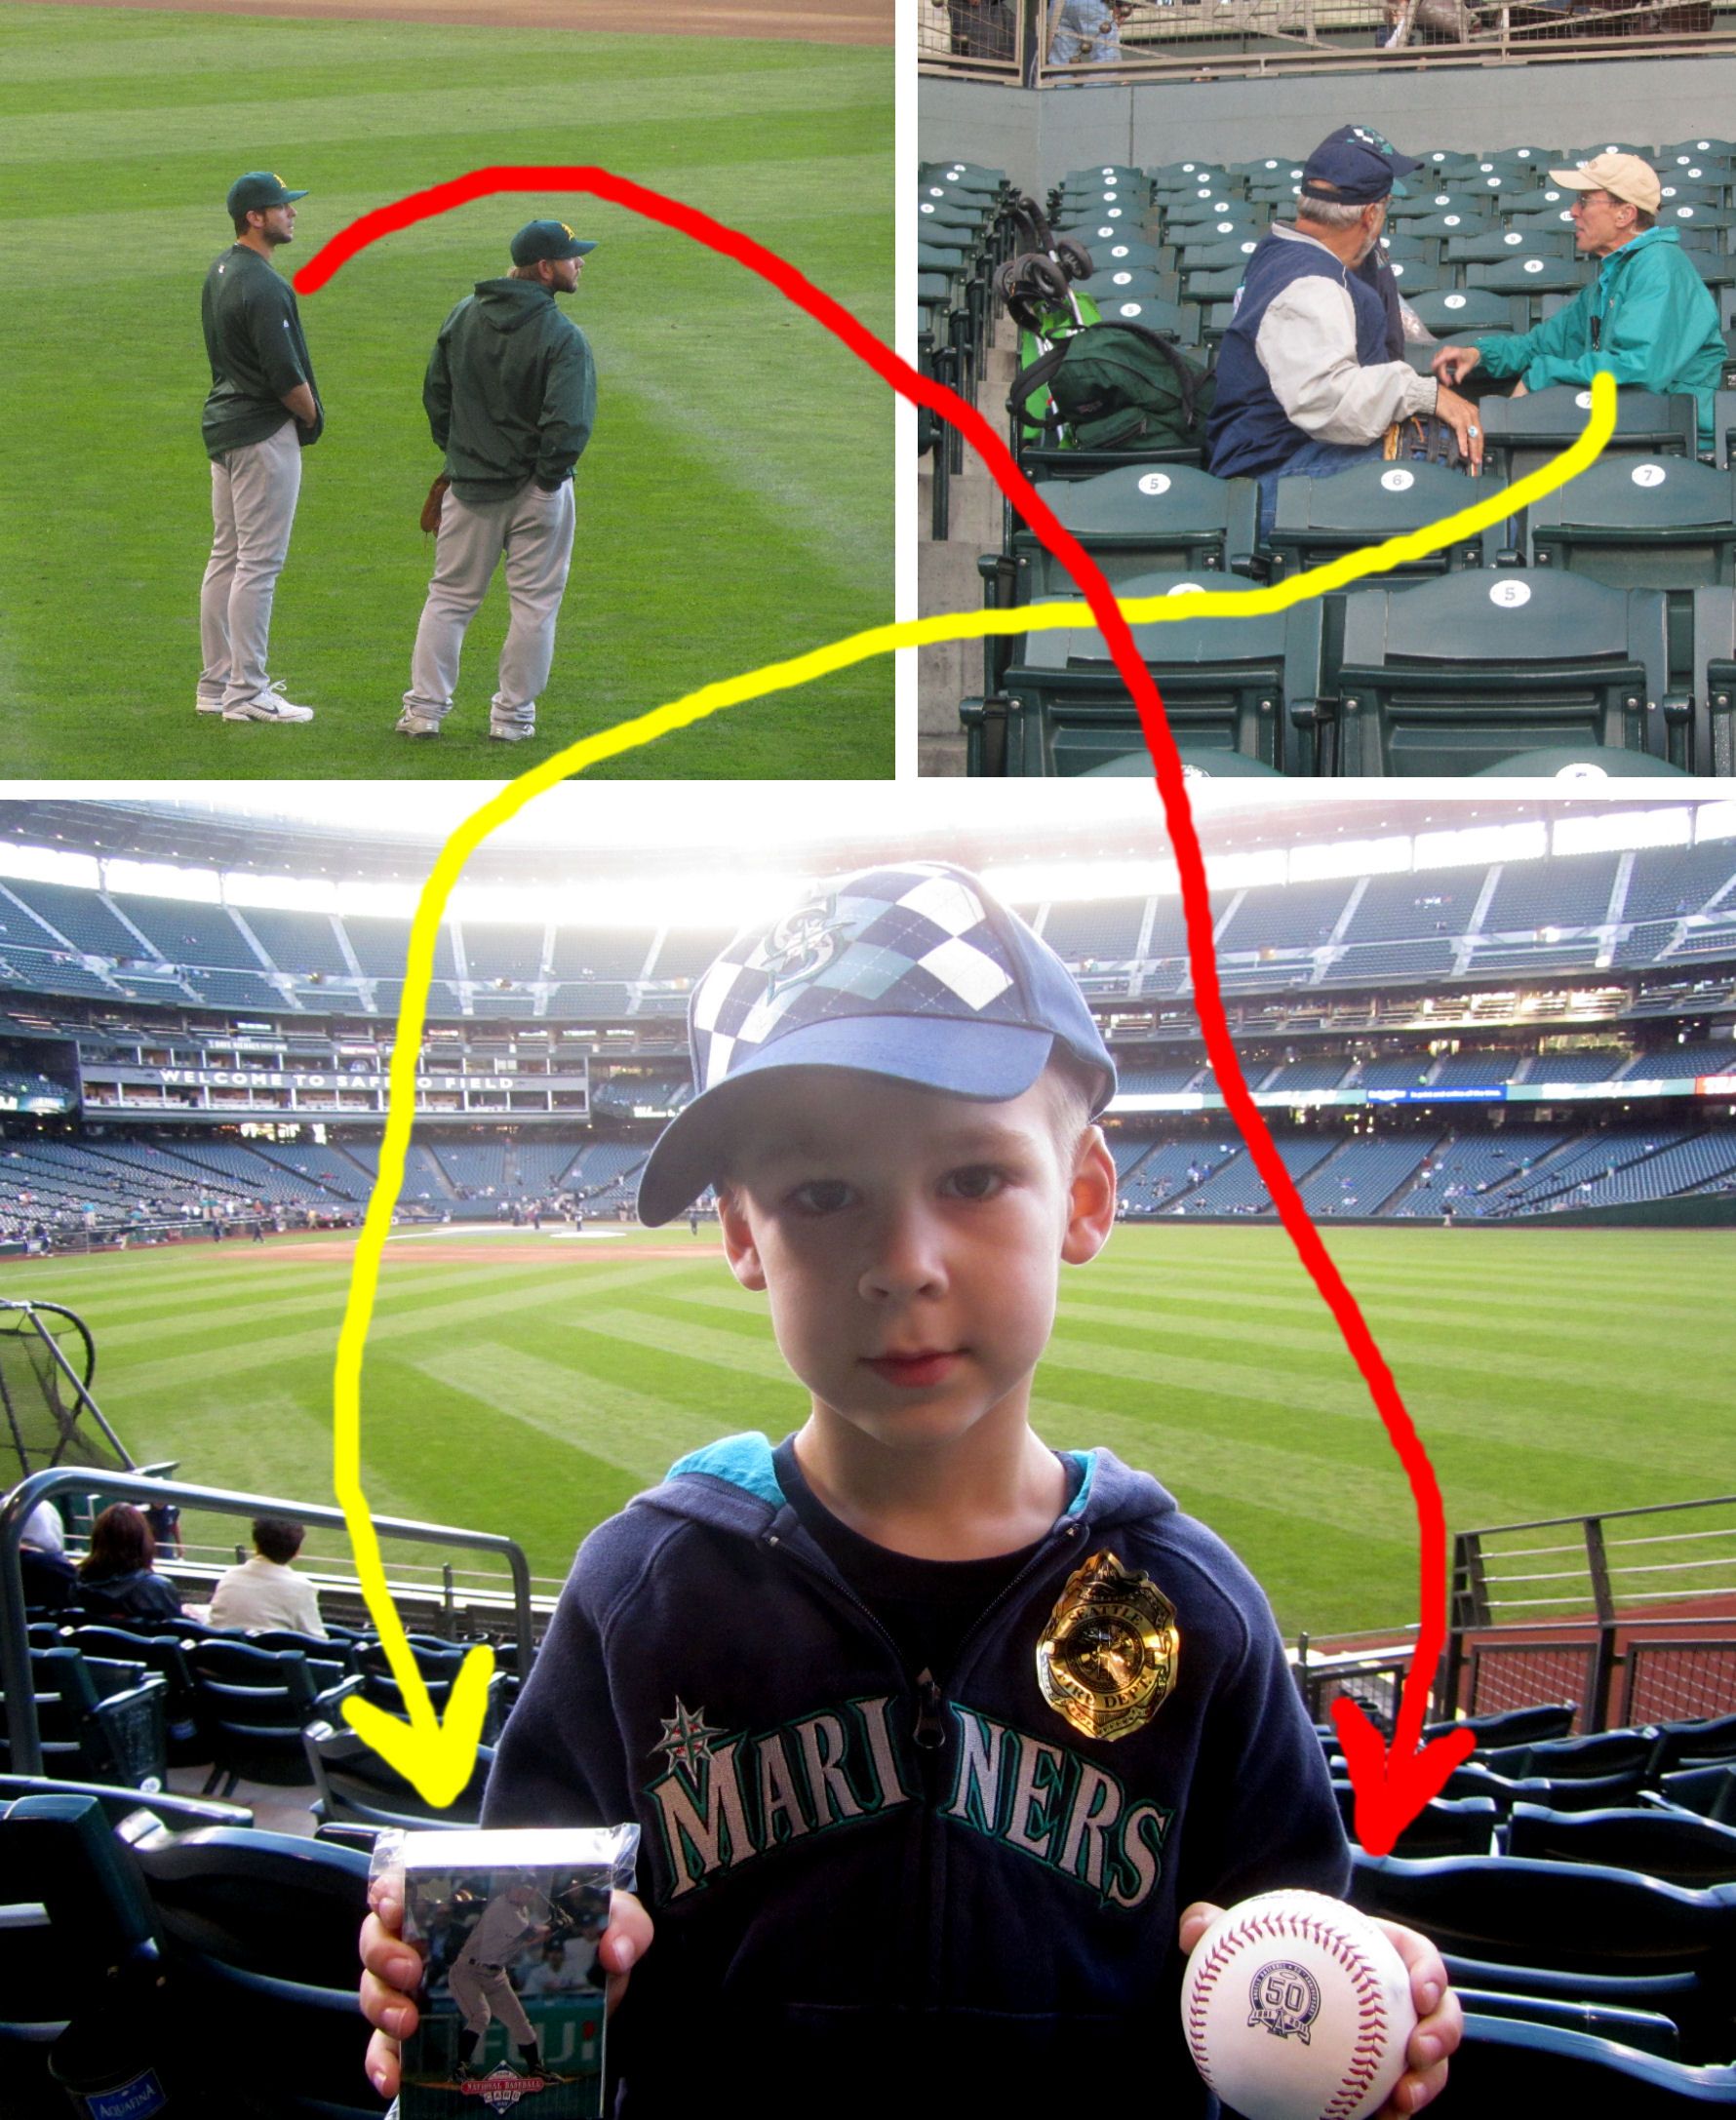 More Fun At Safeco Field 9 / 27 / 2011 Cook & Sons Baseball